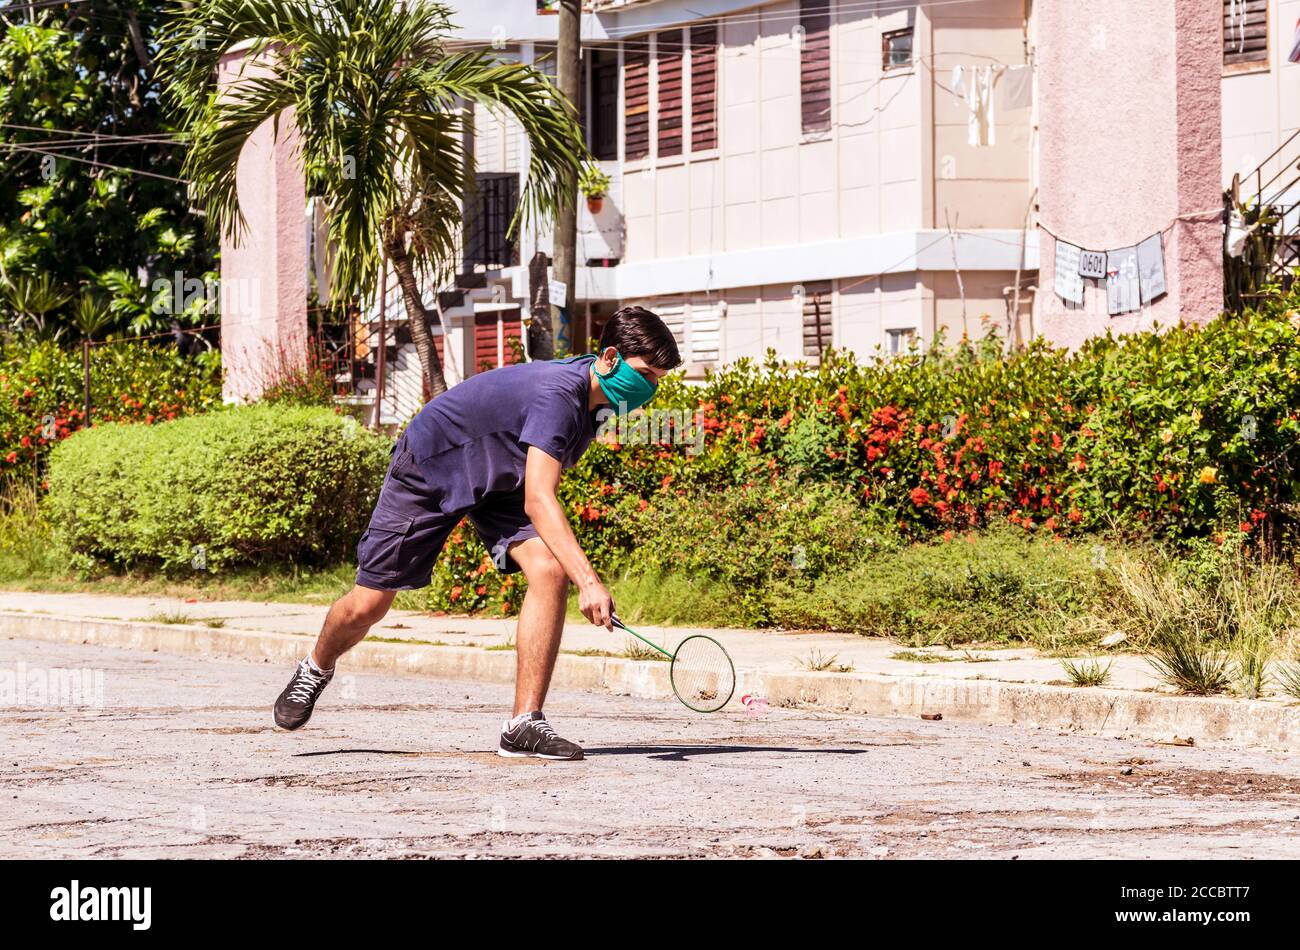 Young male during an informal badminton practice out in the street. Stock Photo